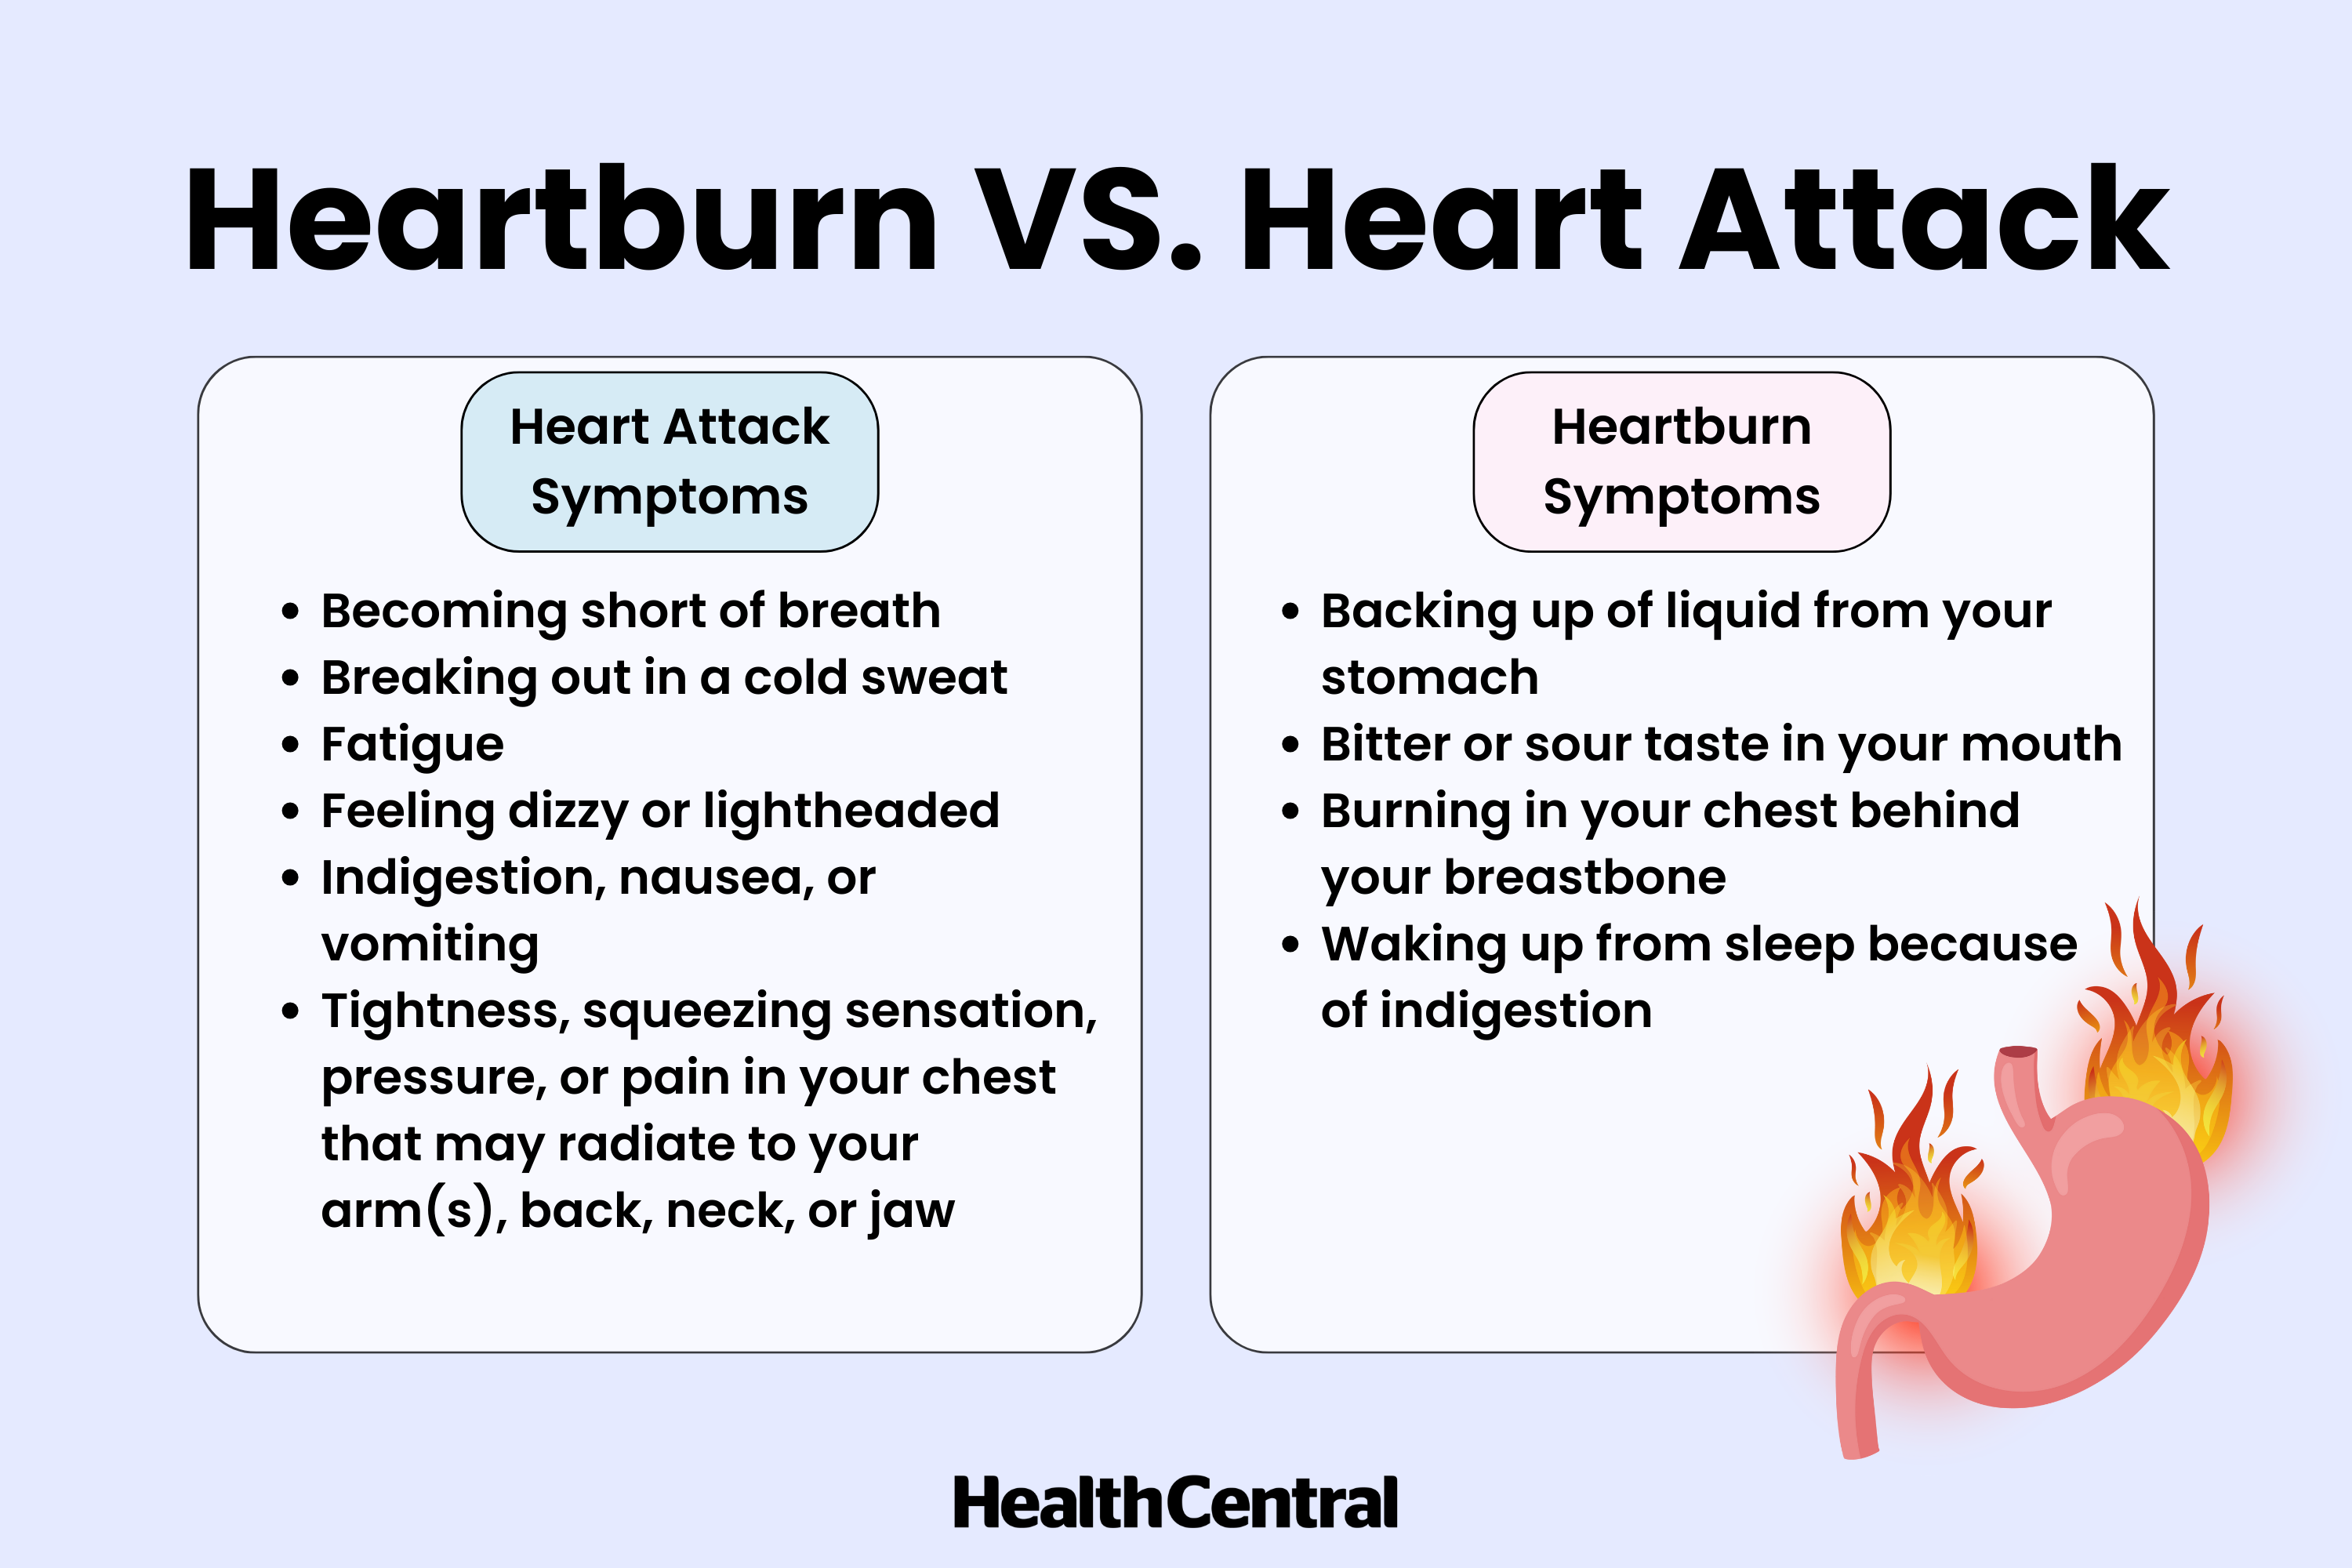 Heartburn vs Heart Attack: Understanding the Differences